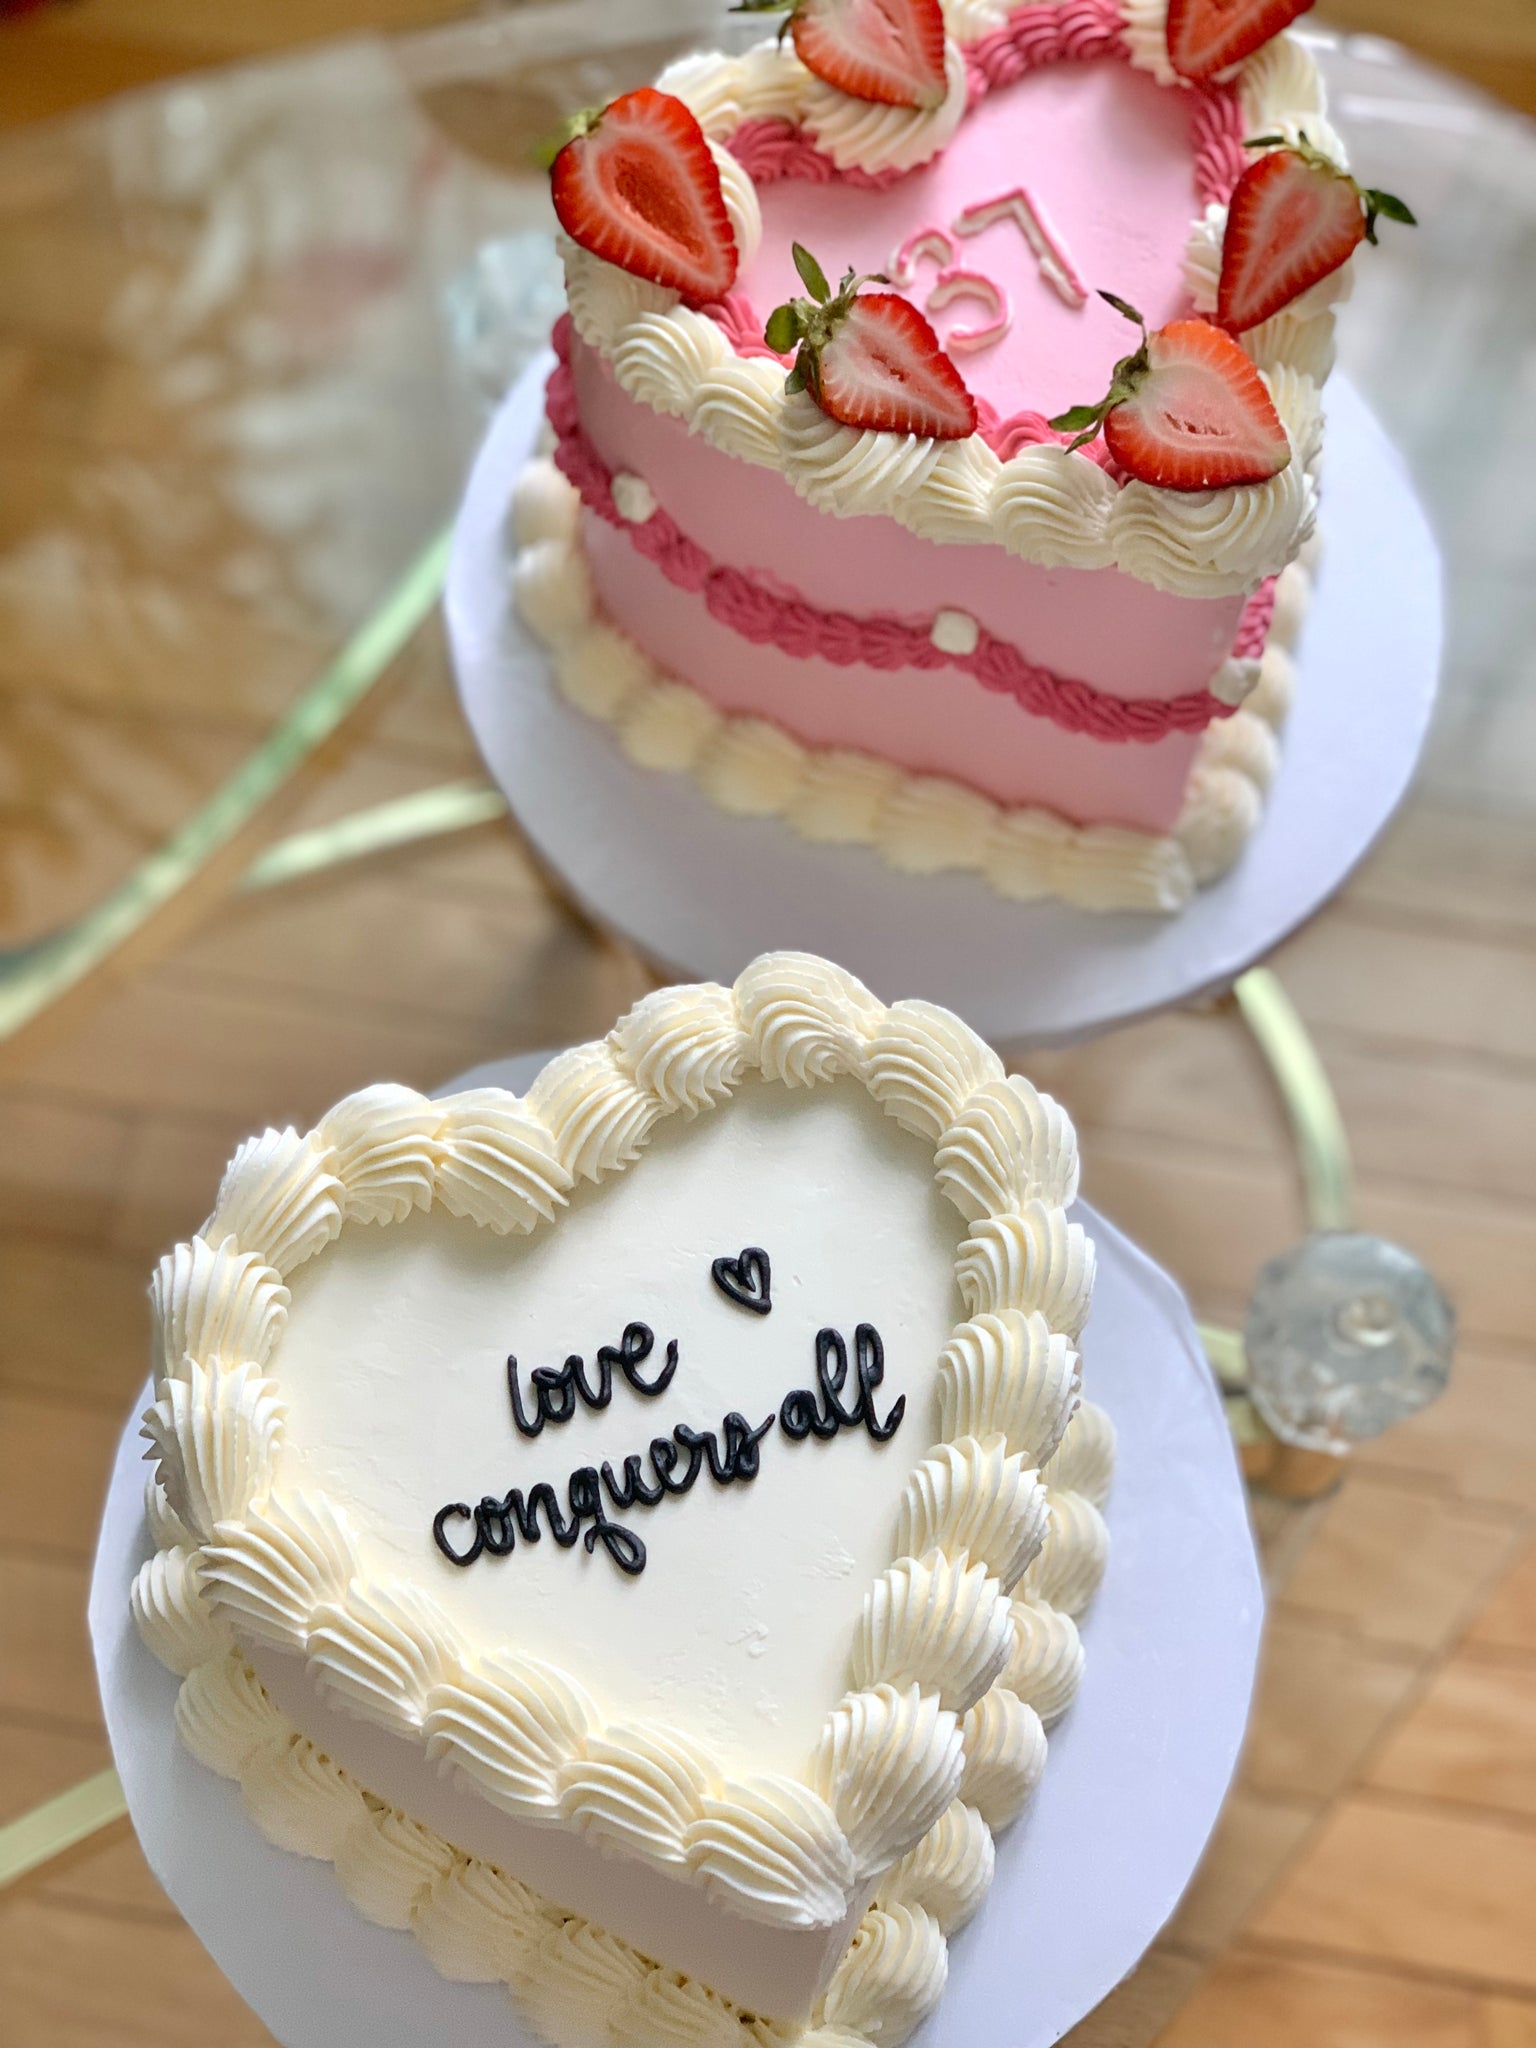 How to Make a Conversation Heart Cake | Valentine's Day Recipes and Ideas |  Food Network